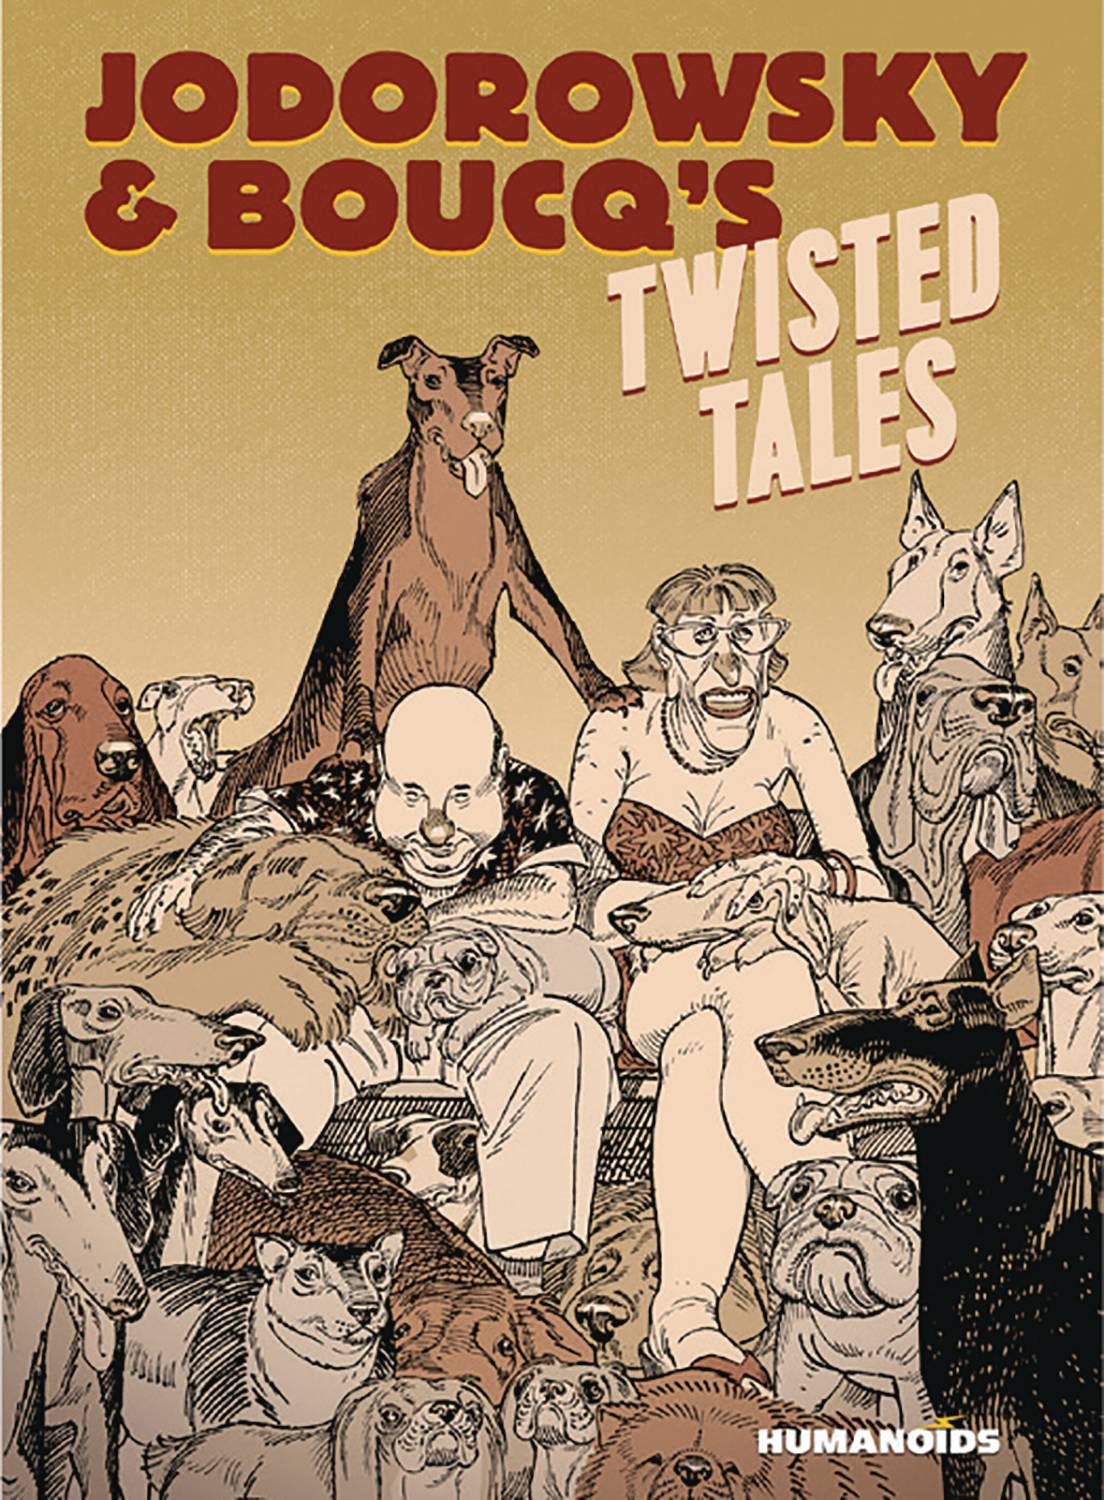 JODOROWSKY & BOUCQS TWISTED TALES HC | L.A. Mood Comics and Games